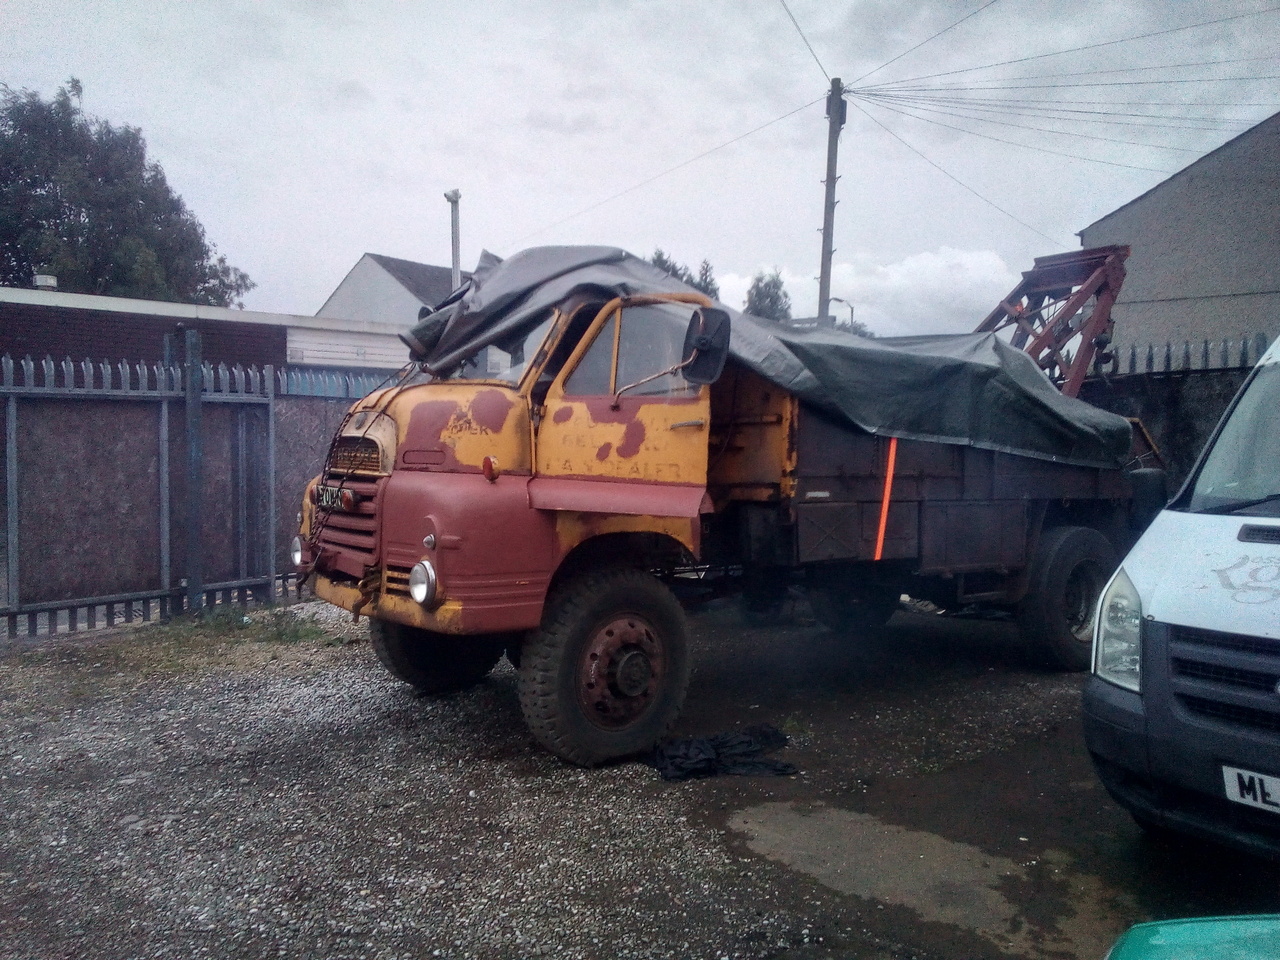 The truck, parked in a small gravel yard, with a cloud of smoke
blowing out from under it as the engine runs.